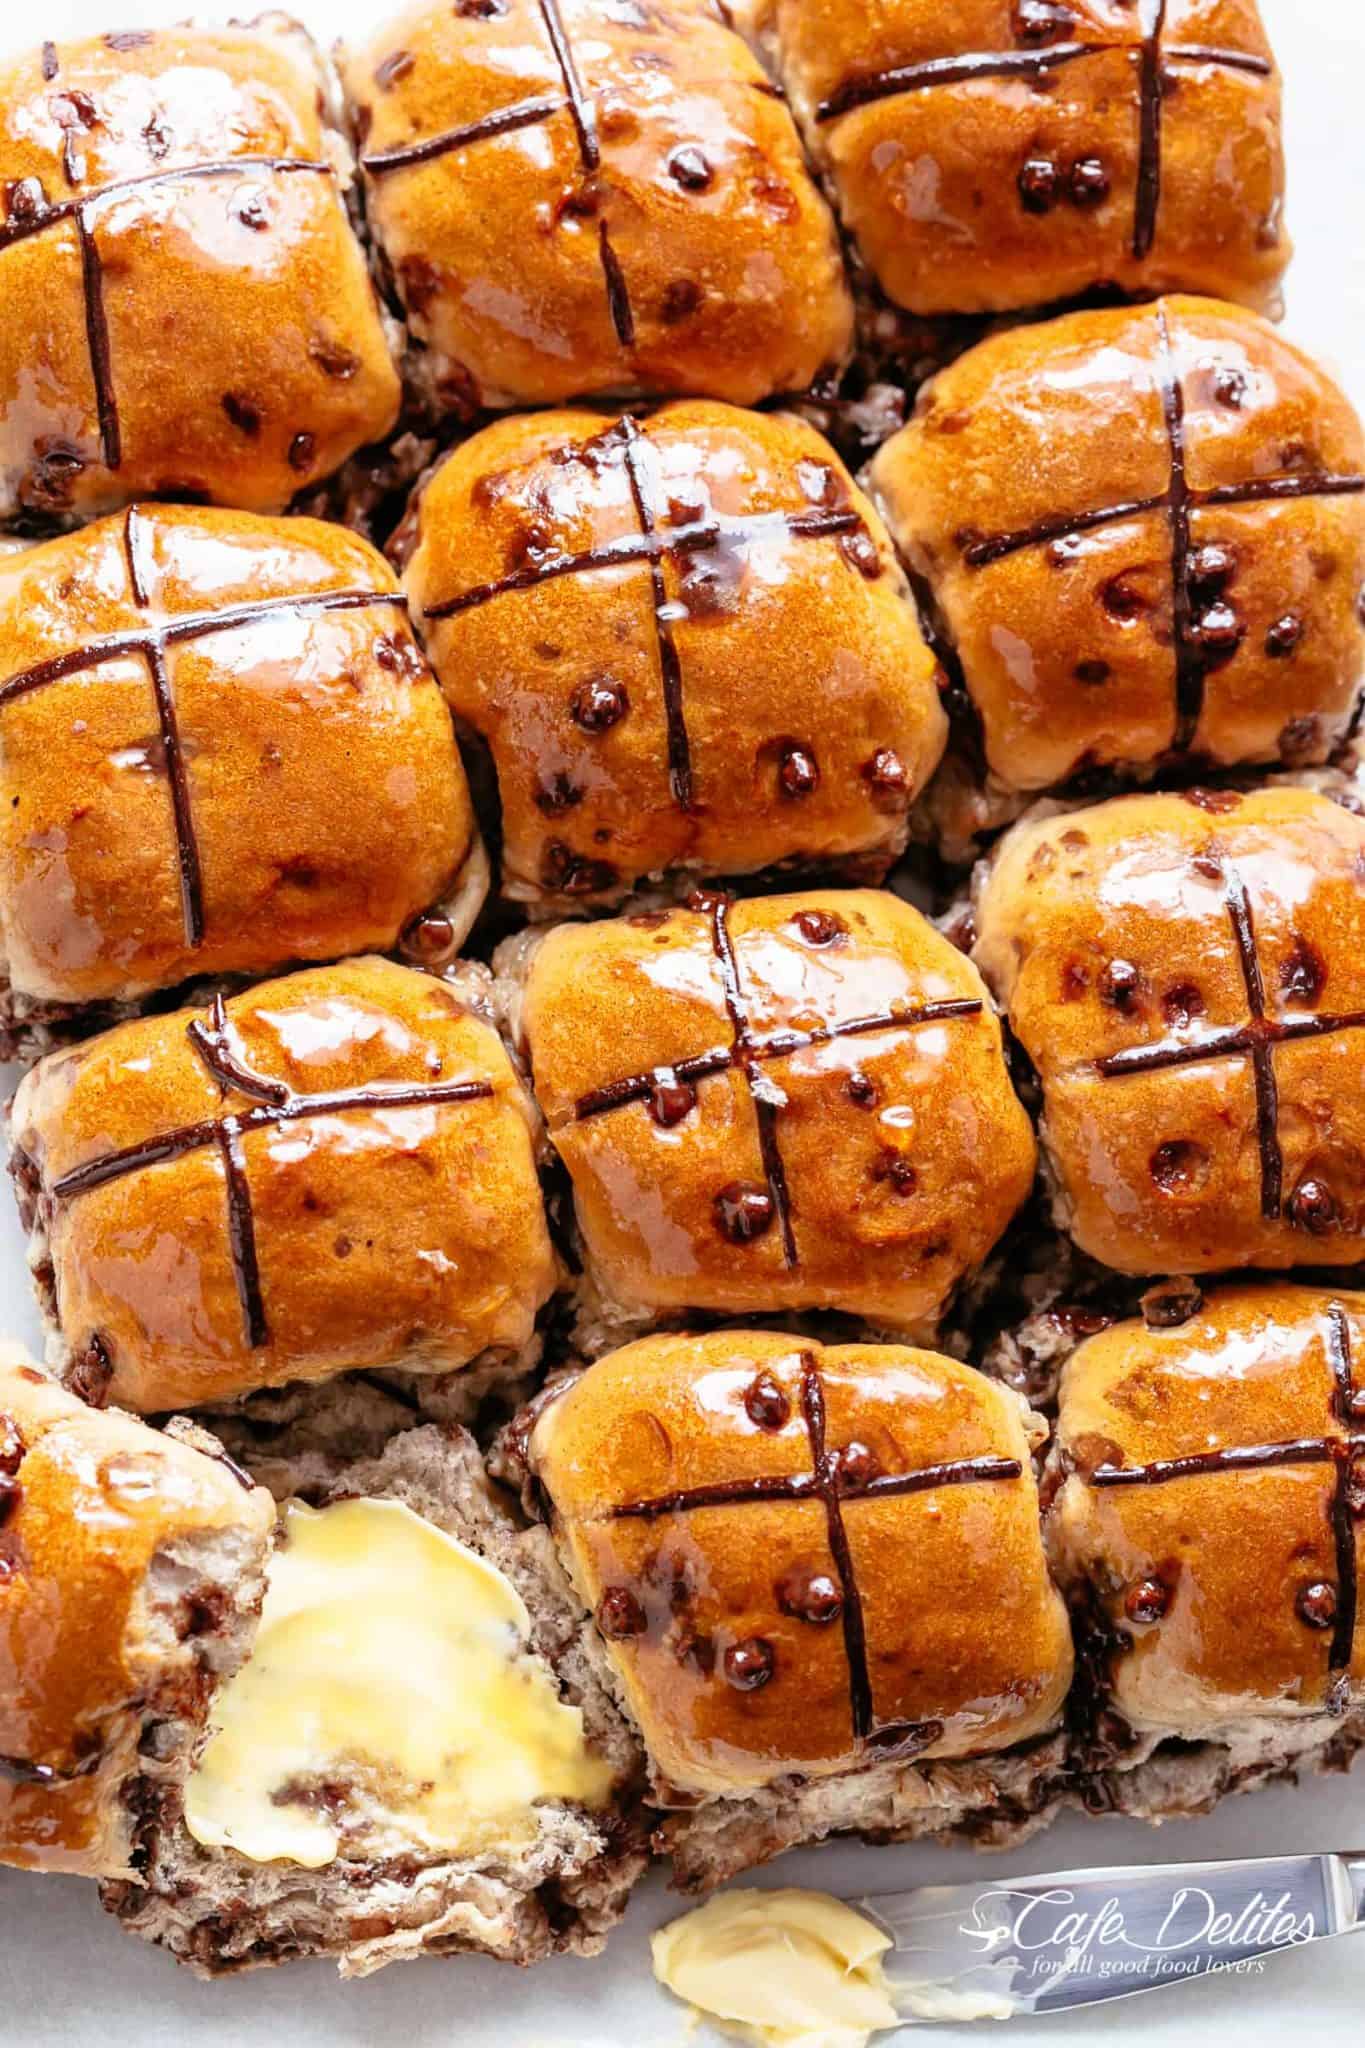 Easy Hot Cross Buns (Chocolate Chips) - Cafe Delites